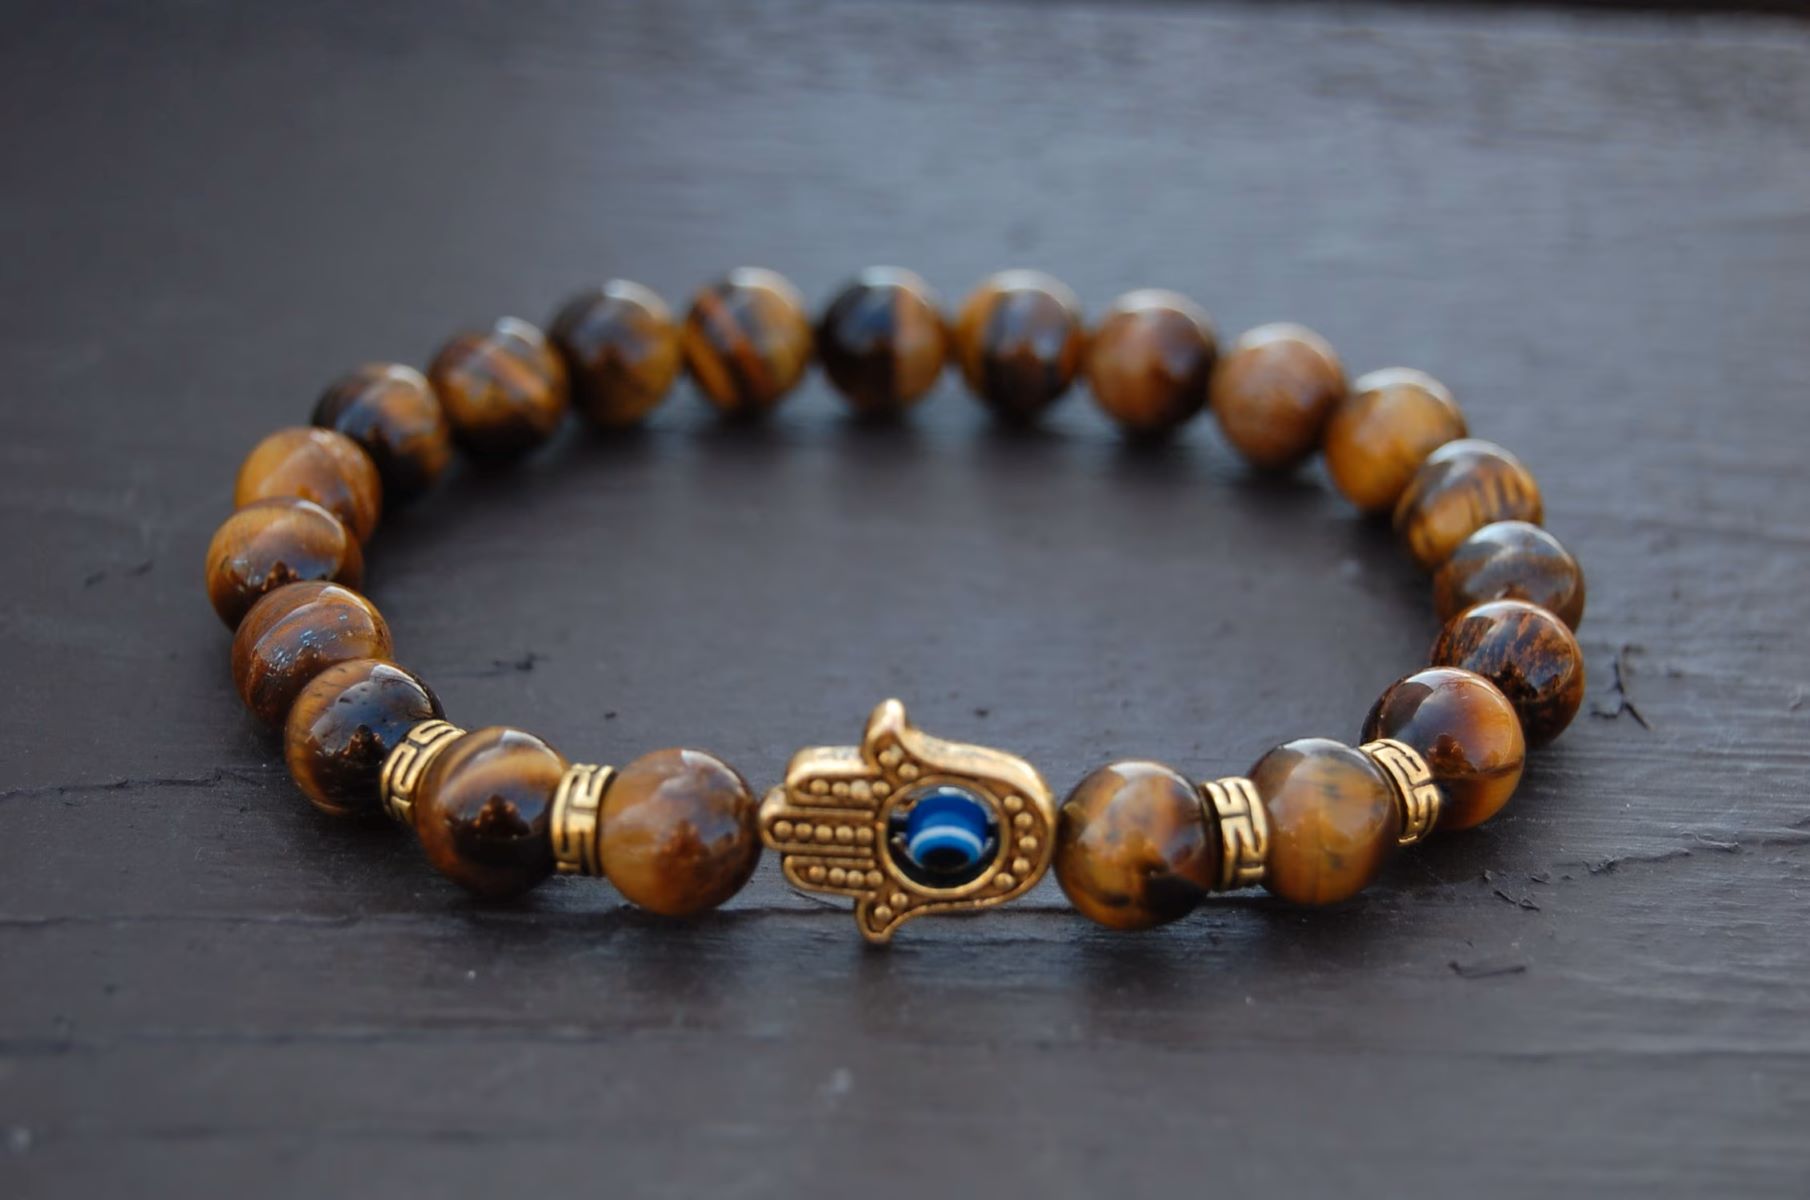 Transform Your Broken Tiger's Eye Bracelet Into A Powerful New Energy Tool!